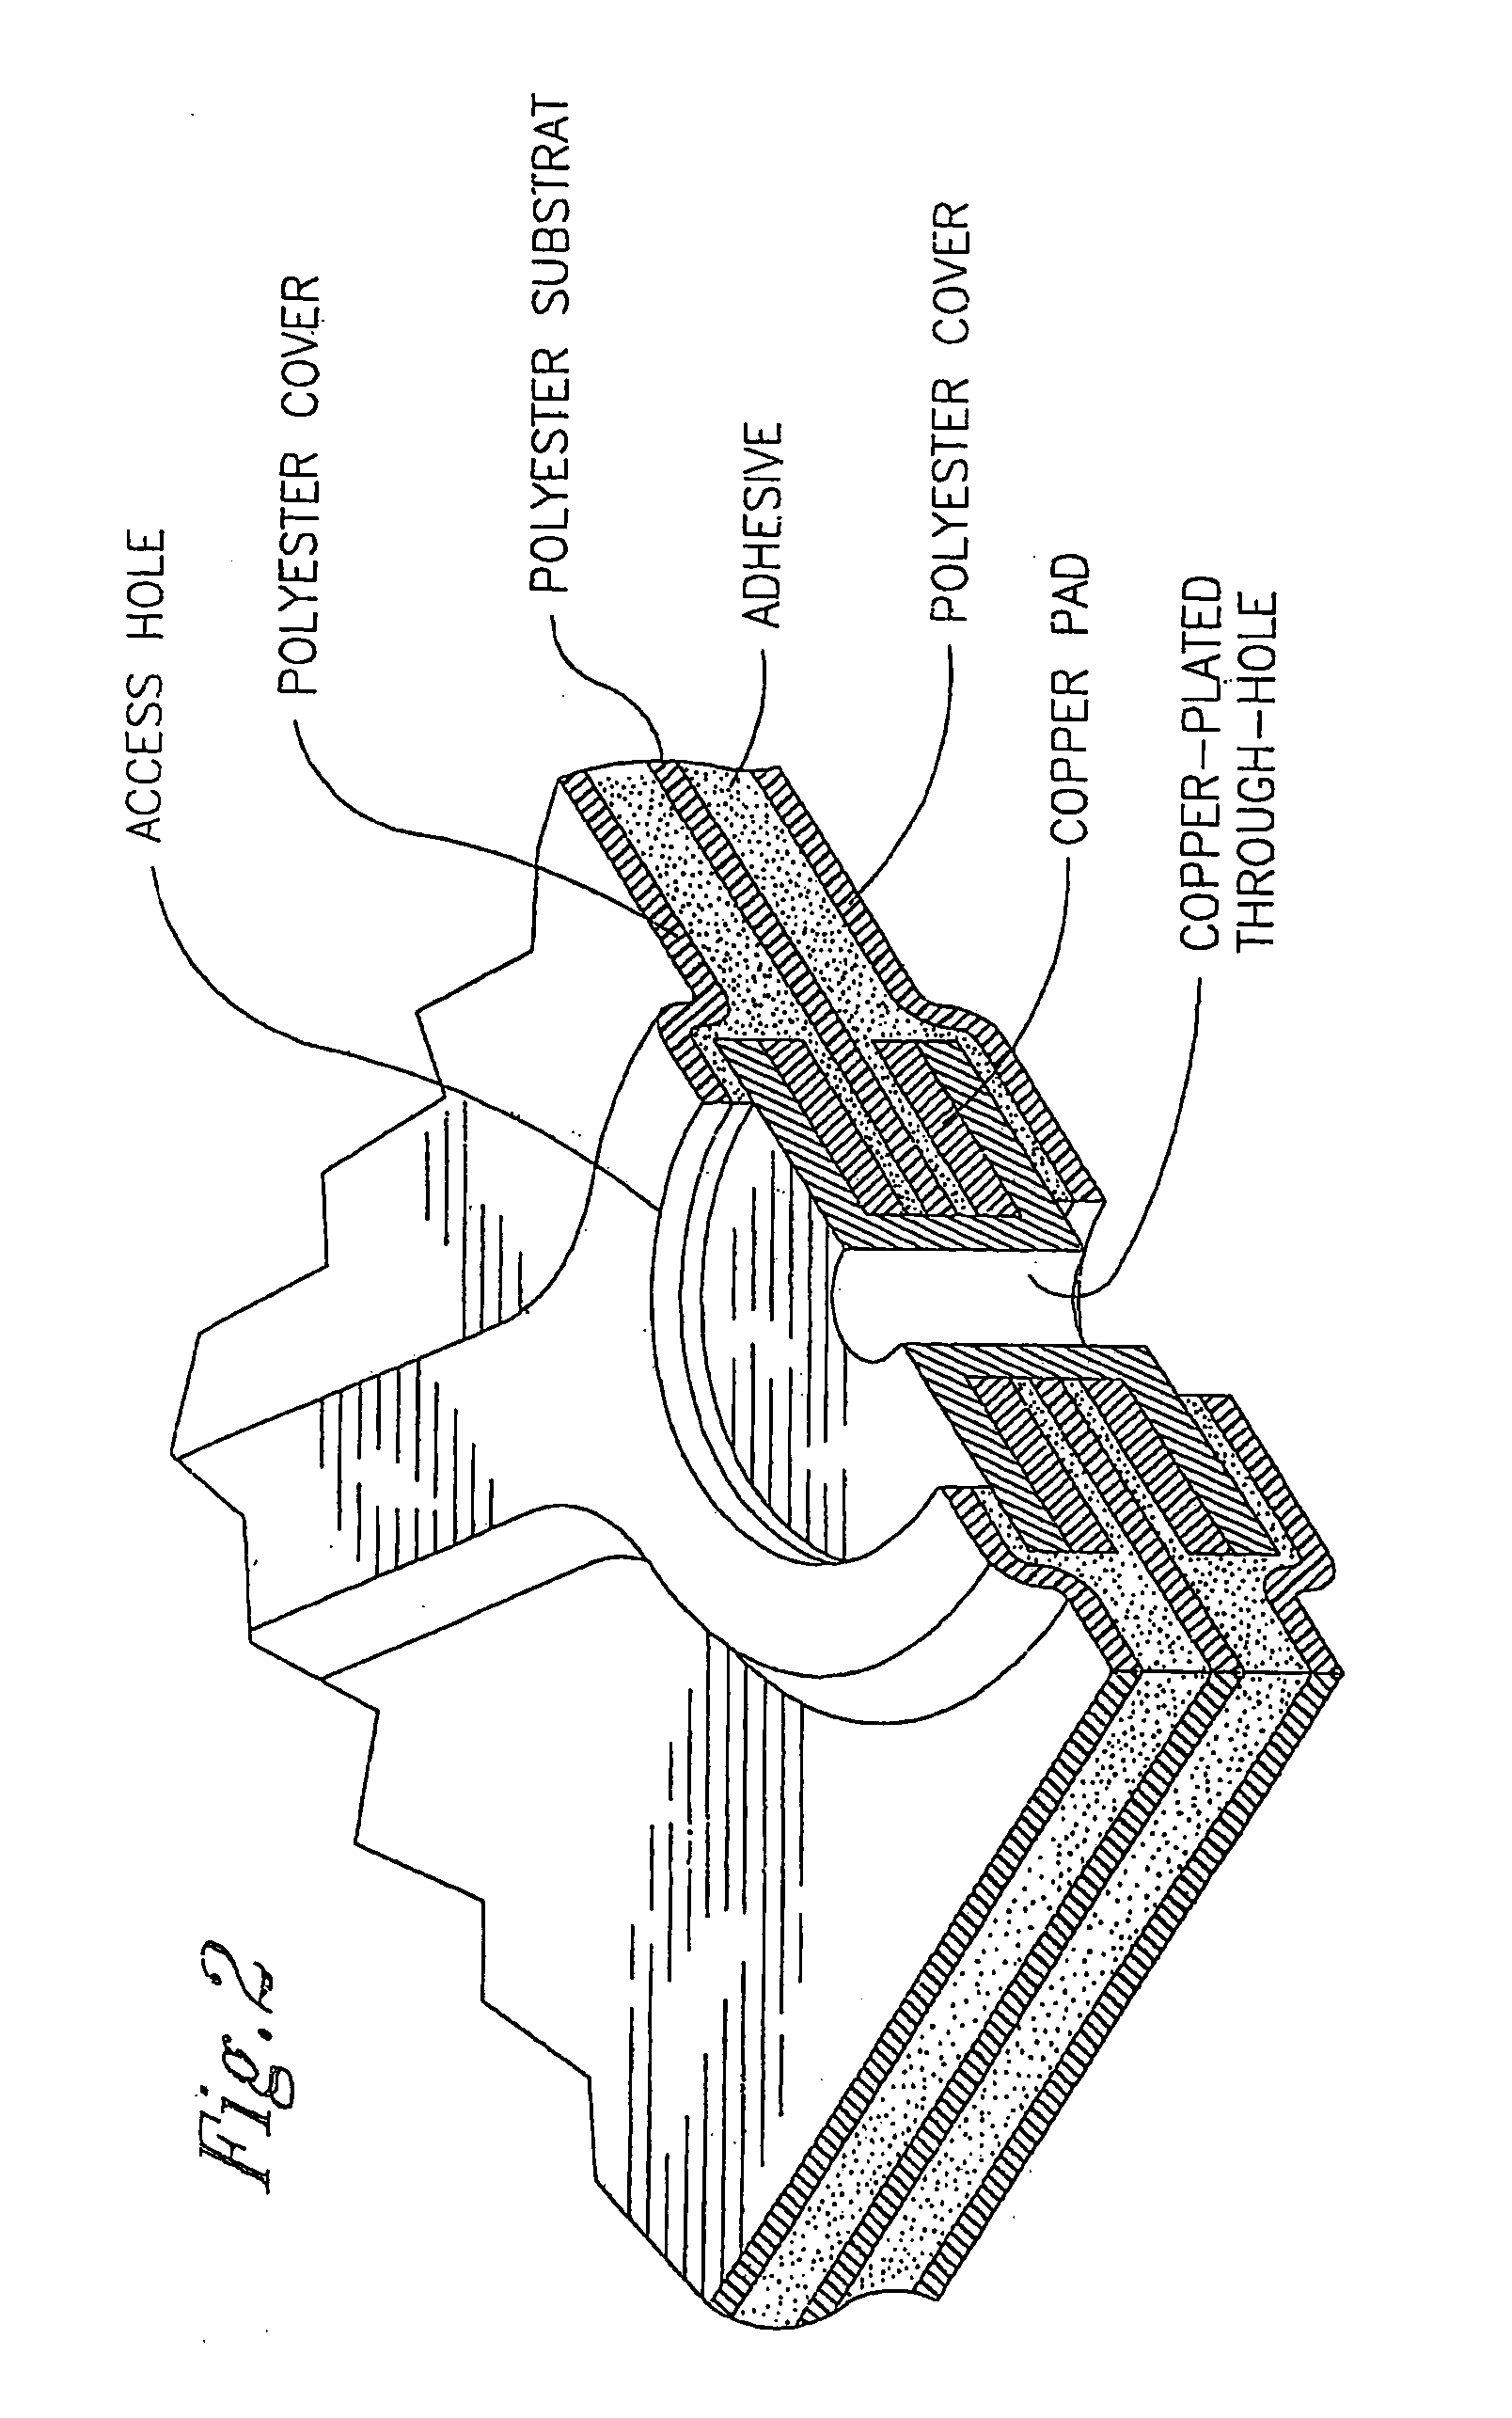 Biaxially oriented copolyester film and laminates thereof with copper